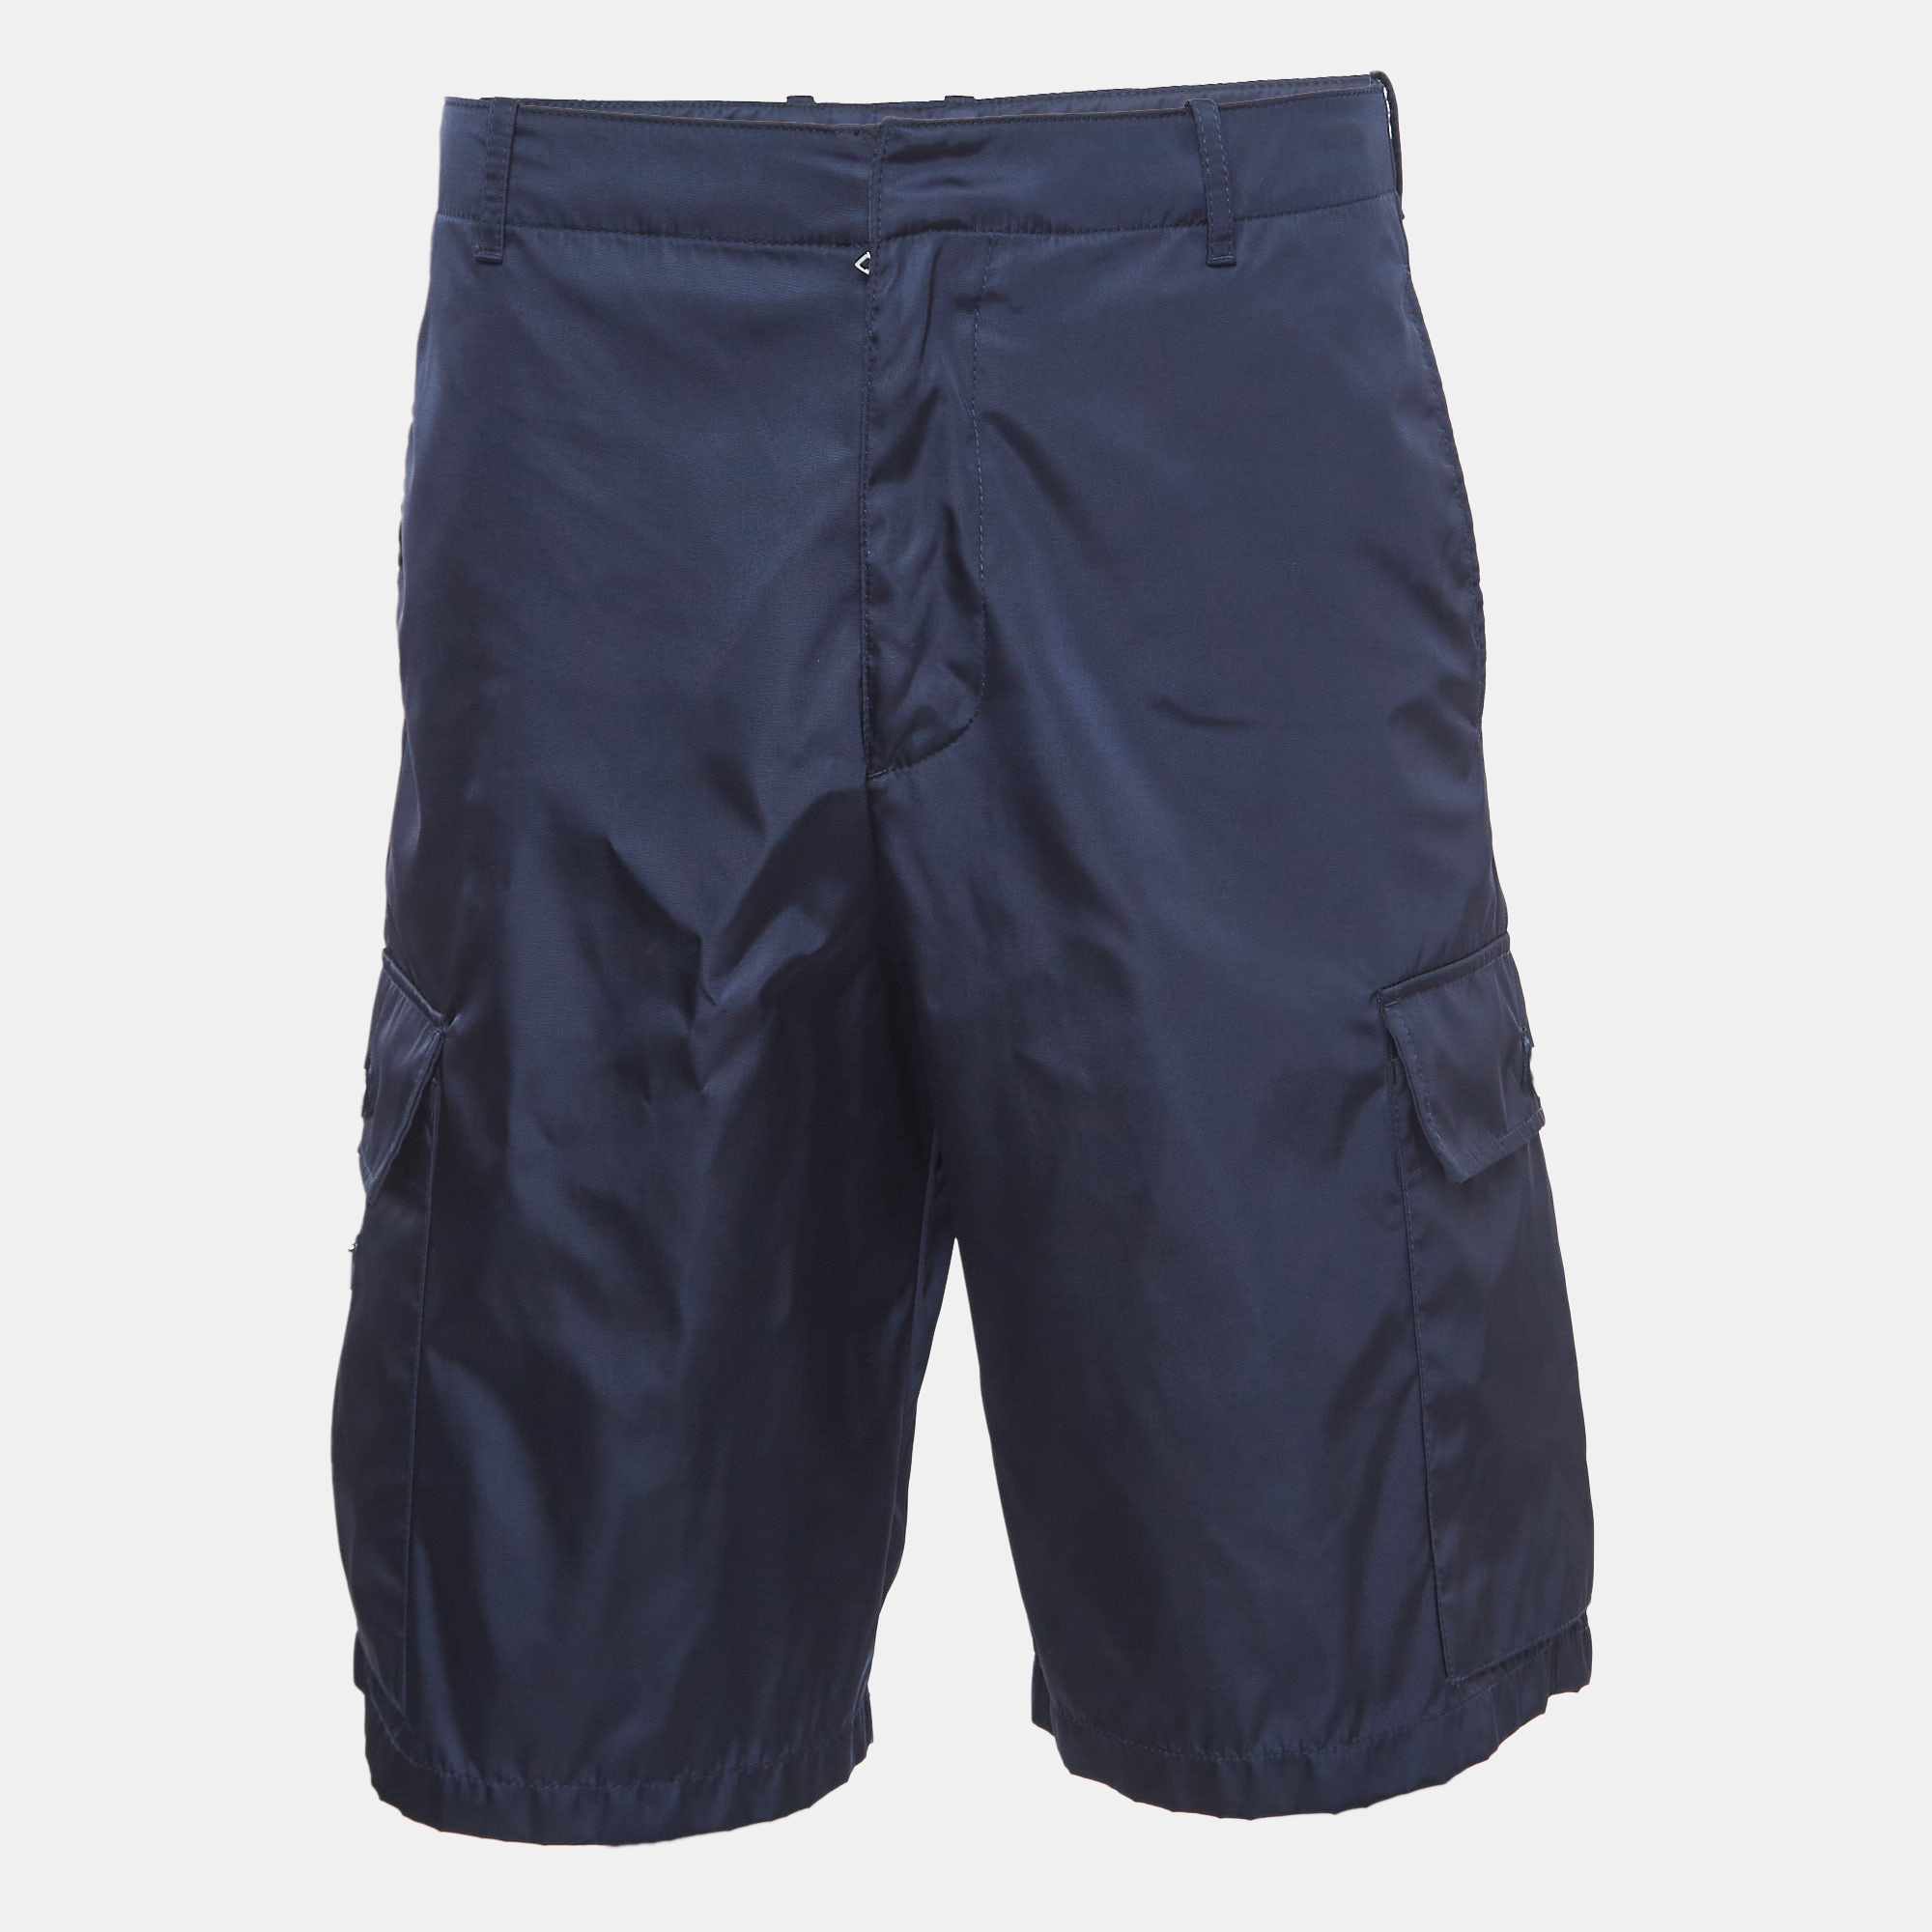 Relaxed days call for a pair of shorts like this. Stitched using high quality fabric these designer shorts are styled with classic details and have a superb length. Wear them with T shirts.